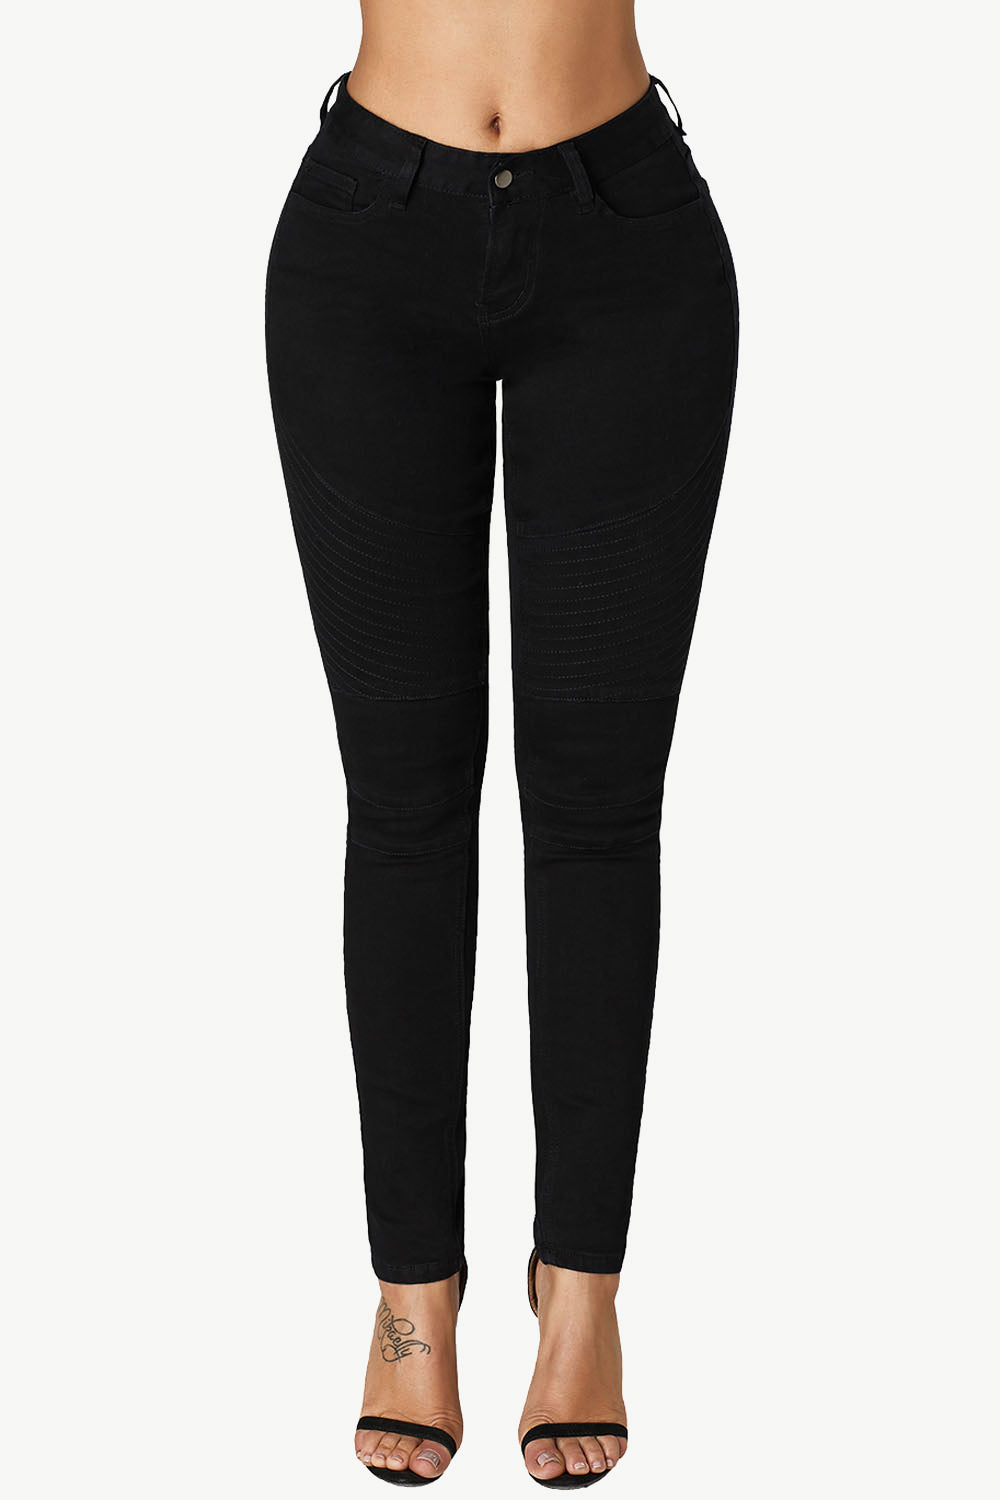 Mid-Rise Waist Skinny Pocketed Jeans Pants